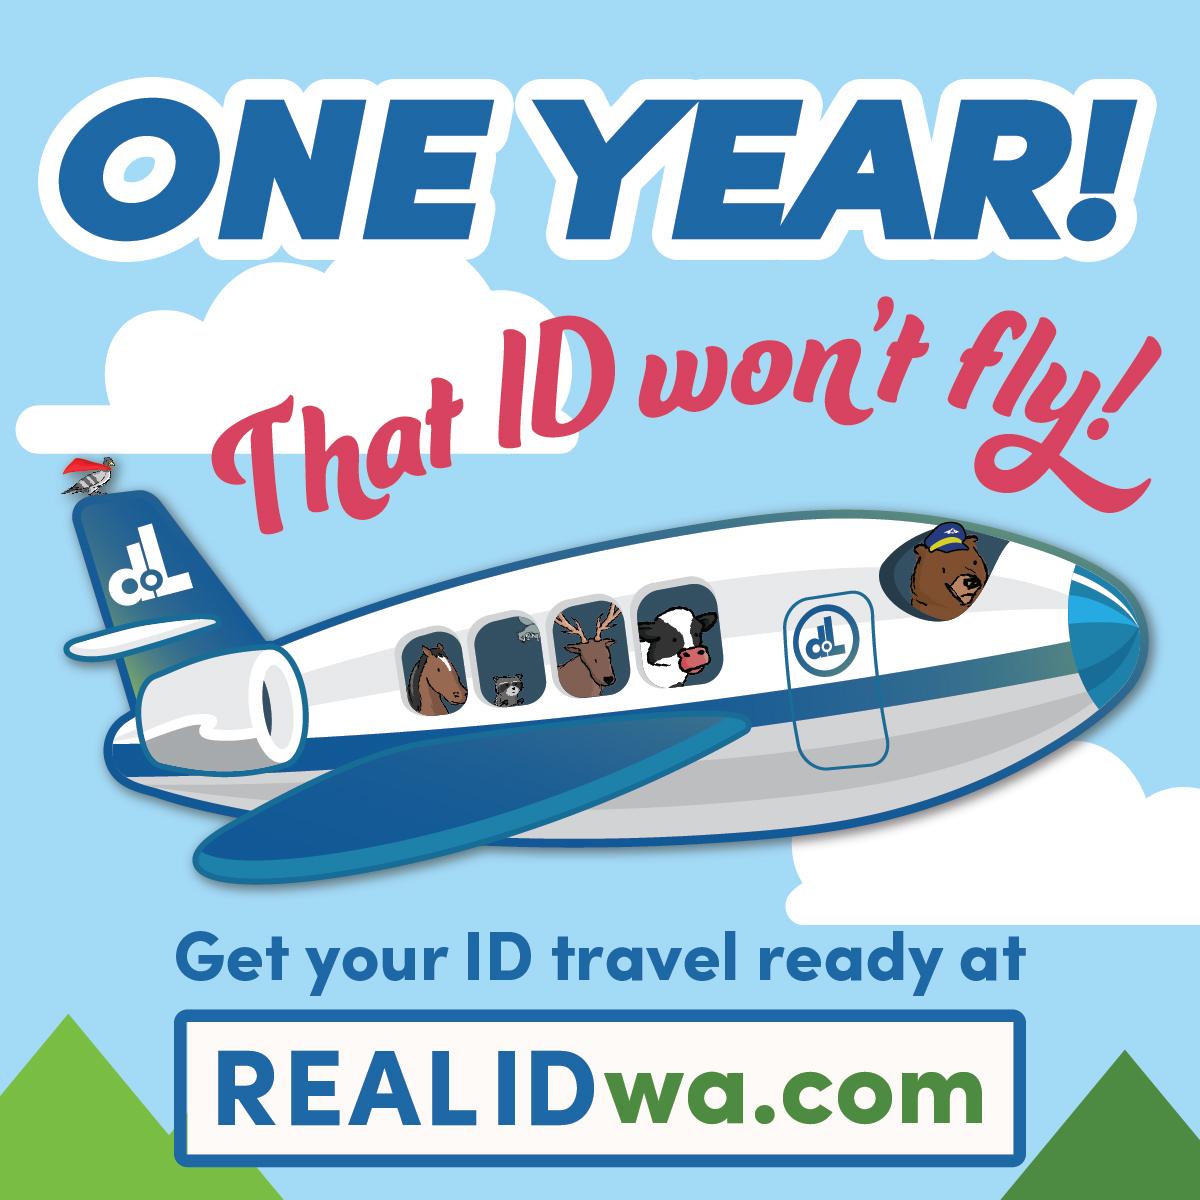 One year! That ID won't fly! Get your ID travel ready at READIDwa.com.